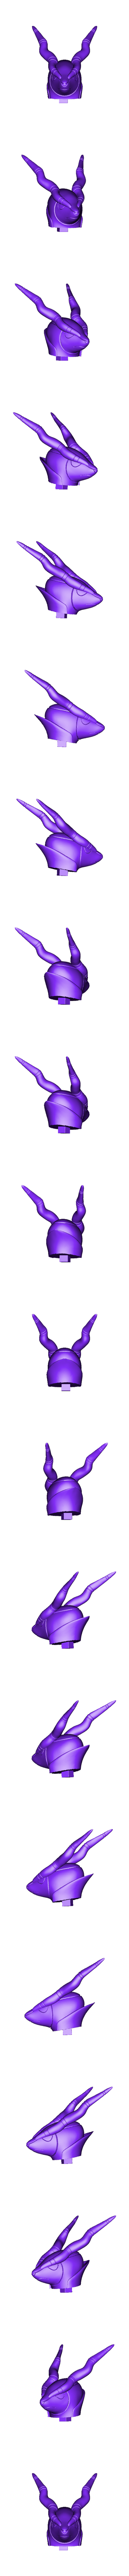 head.obj Download OBJ file Pokemon - Cobalion(with cuts and as a whole) • 3D print design, ErickFontoura3D